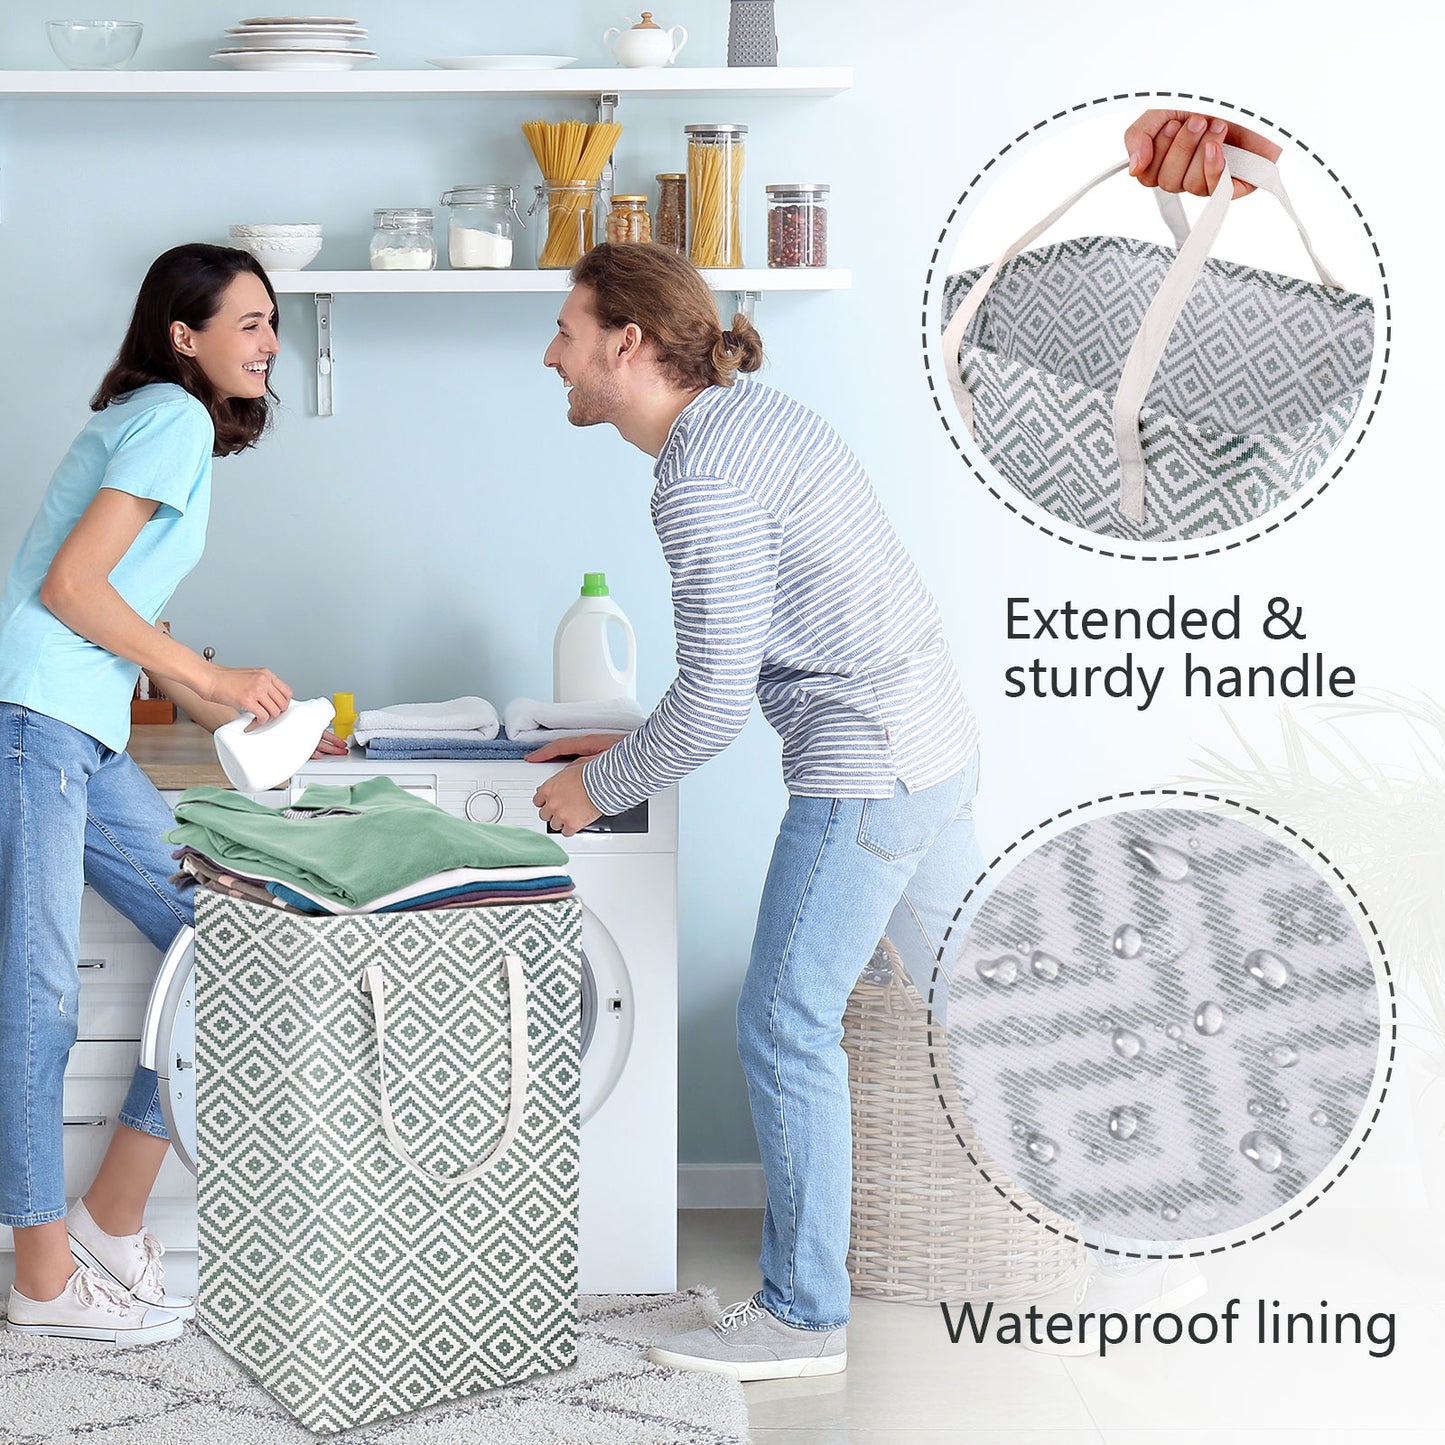 Letensh Laundry Hamper 2 Pack, 75L Foldable Laundry Baskets with Long Handles, Waterproof Dirty Clothes Hamper Organizer Freestanding Tall Laundry Bin for Laundry Room, Bedroom, Dorm, Clothes, Towels